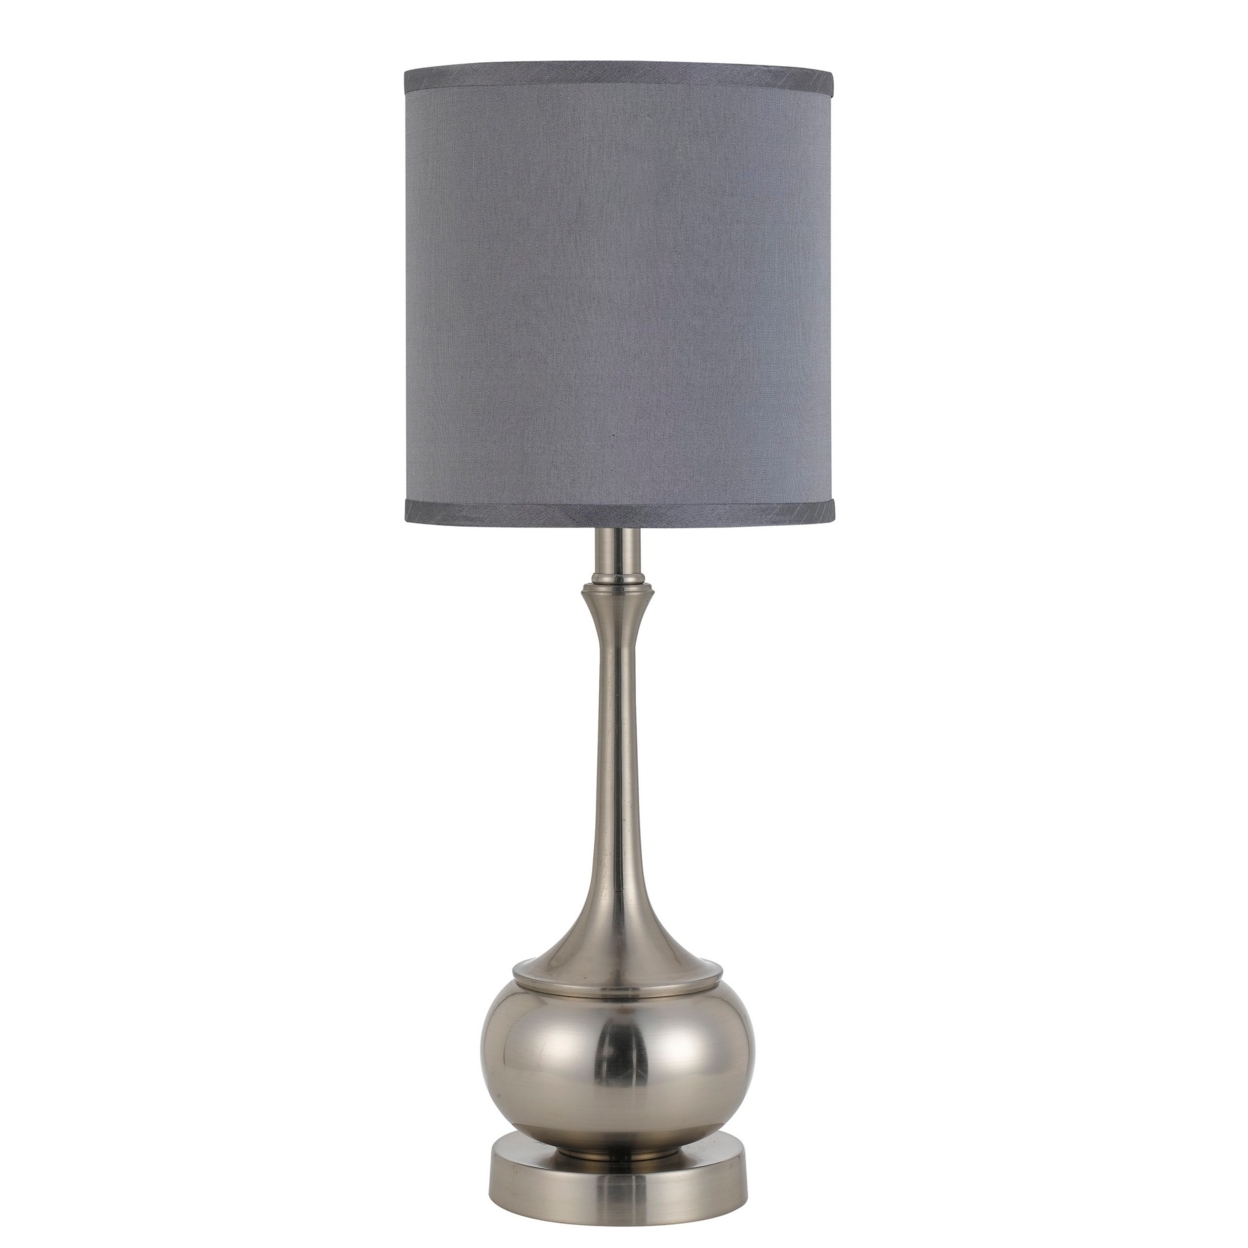 Elongated Bellied Shape Metal Accent Lamp with Drum Shade, Silver- Saltoro Sherpi